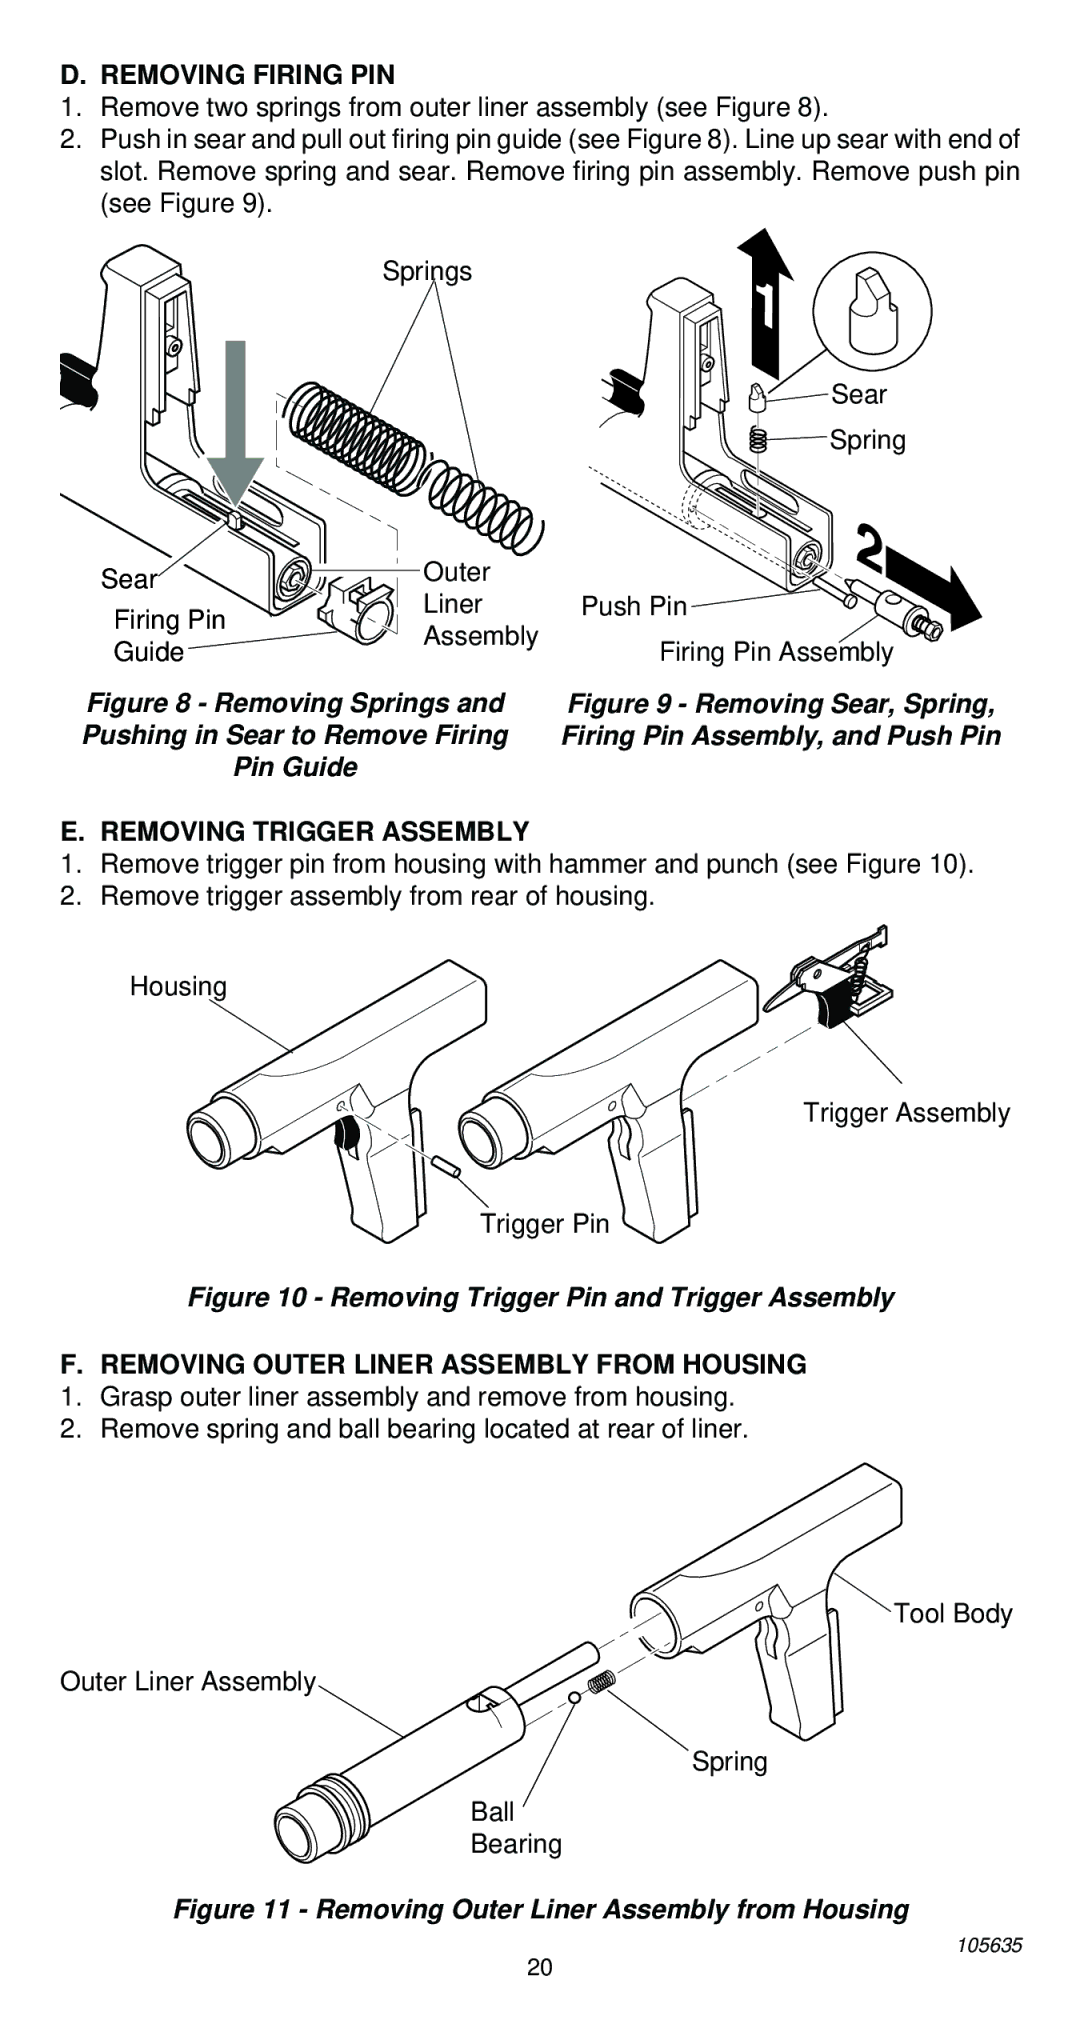 Desa 496 operating instructions Removing Firing PIN, Removing Trigger Assembly, Removing Outer Liner Assembly from Housing 